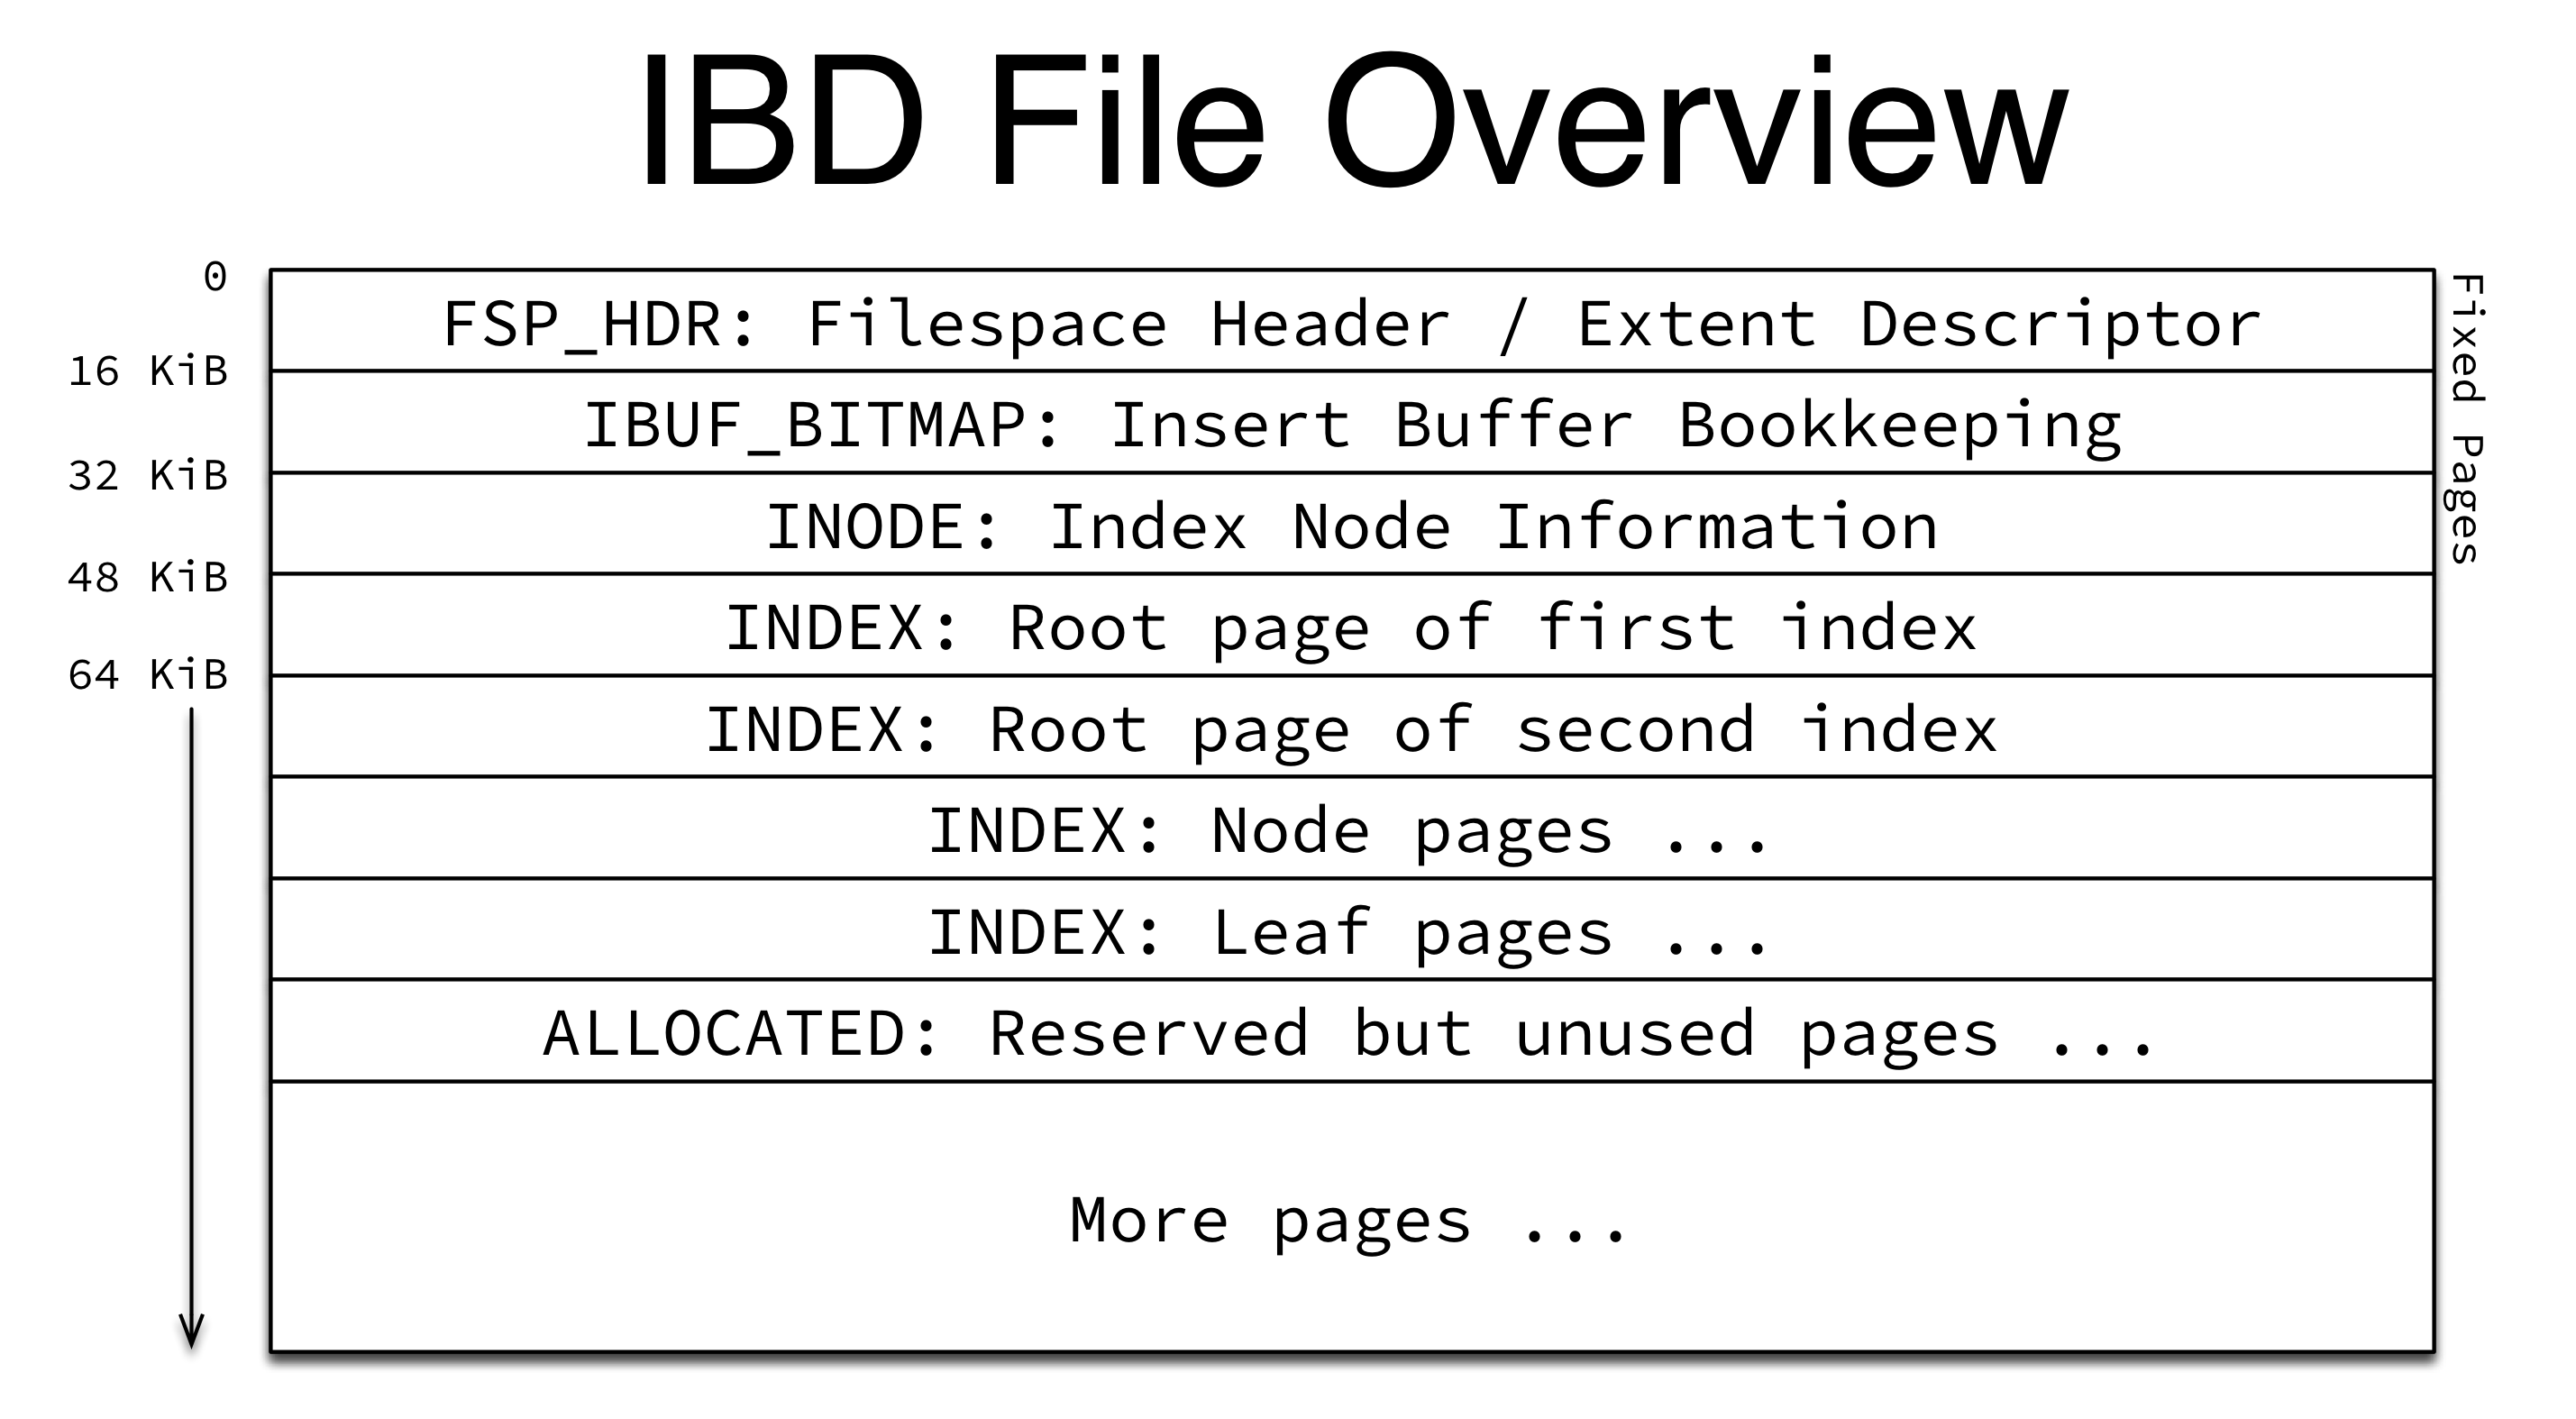 IBD File Overview